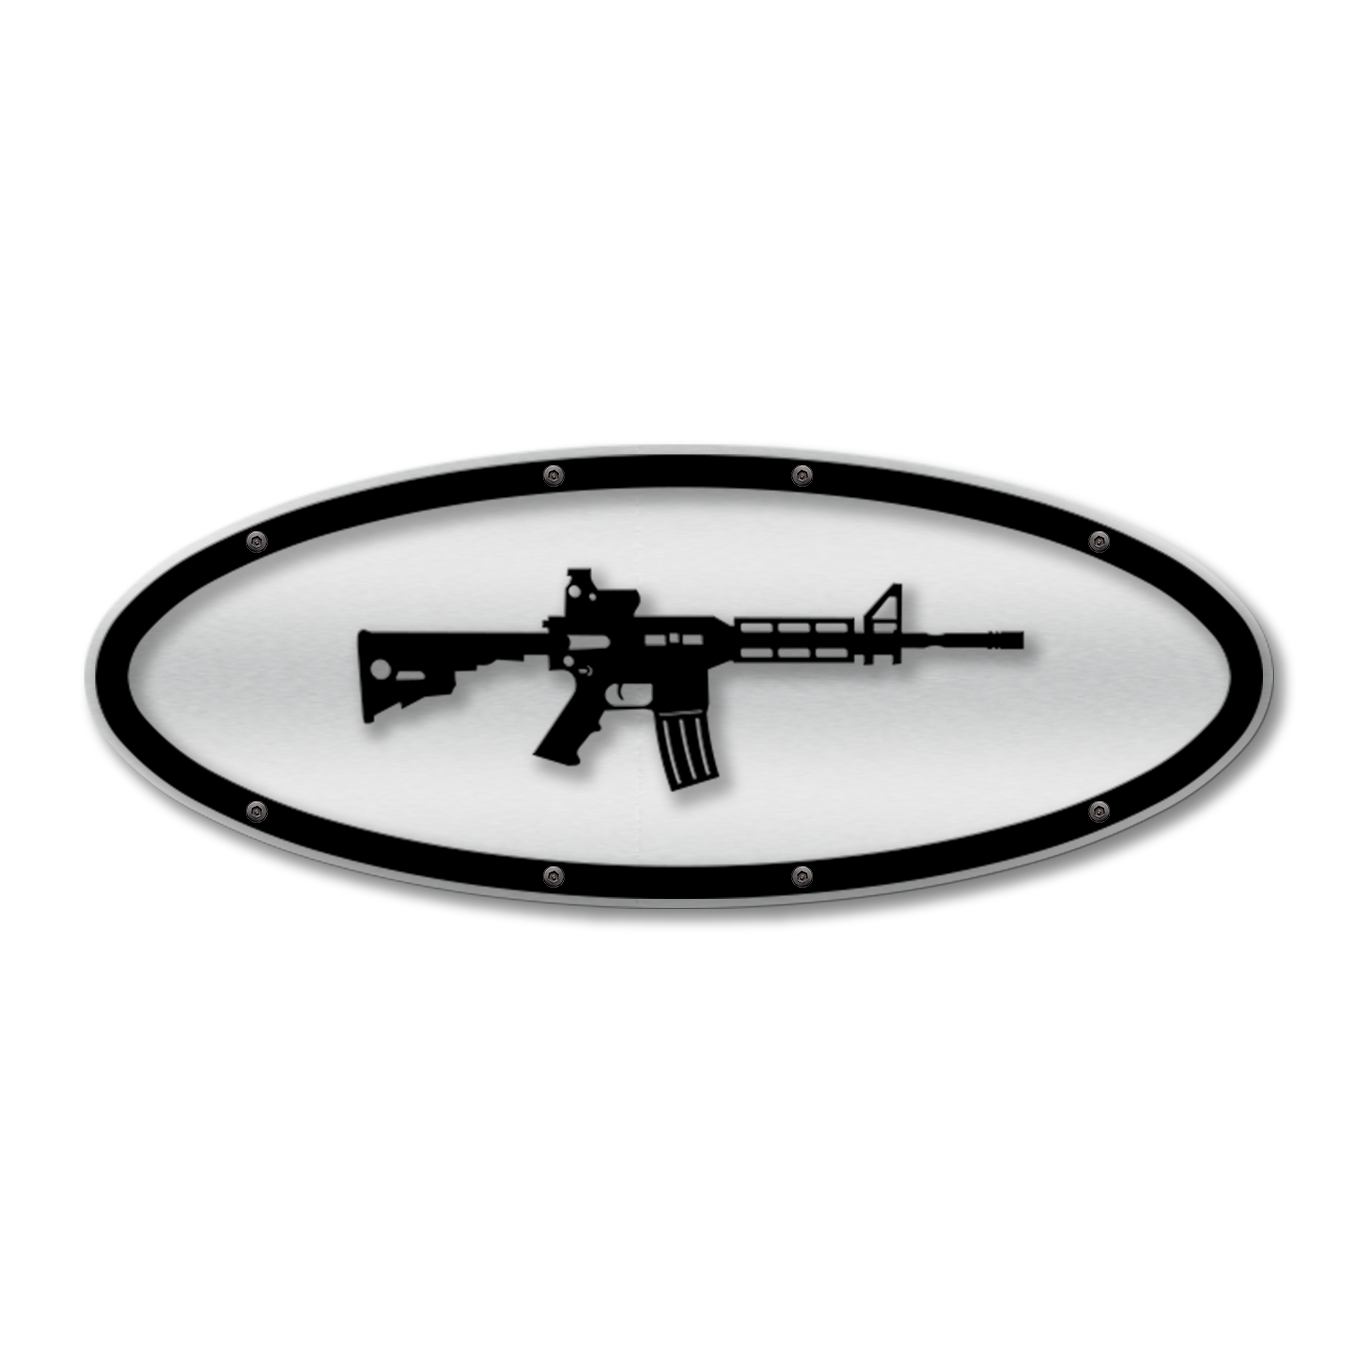 AR15 Design Oval Replacement - Fits Multiple Ford® Trucks - Fully Customizable Colors